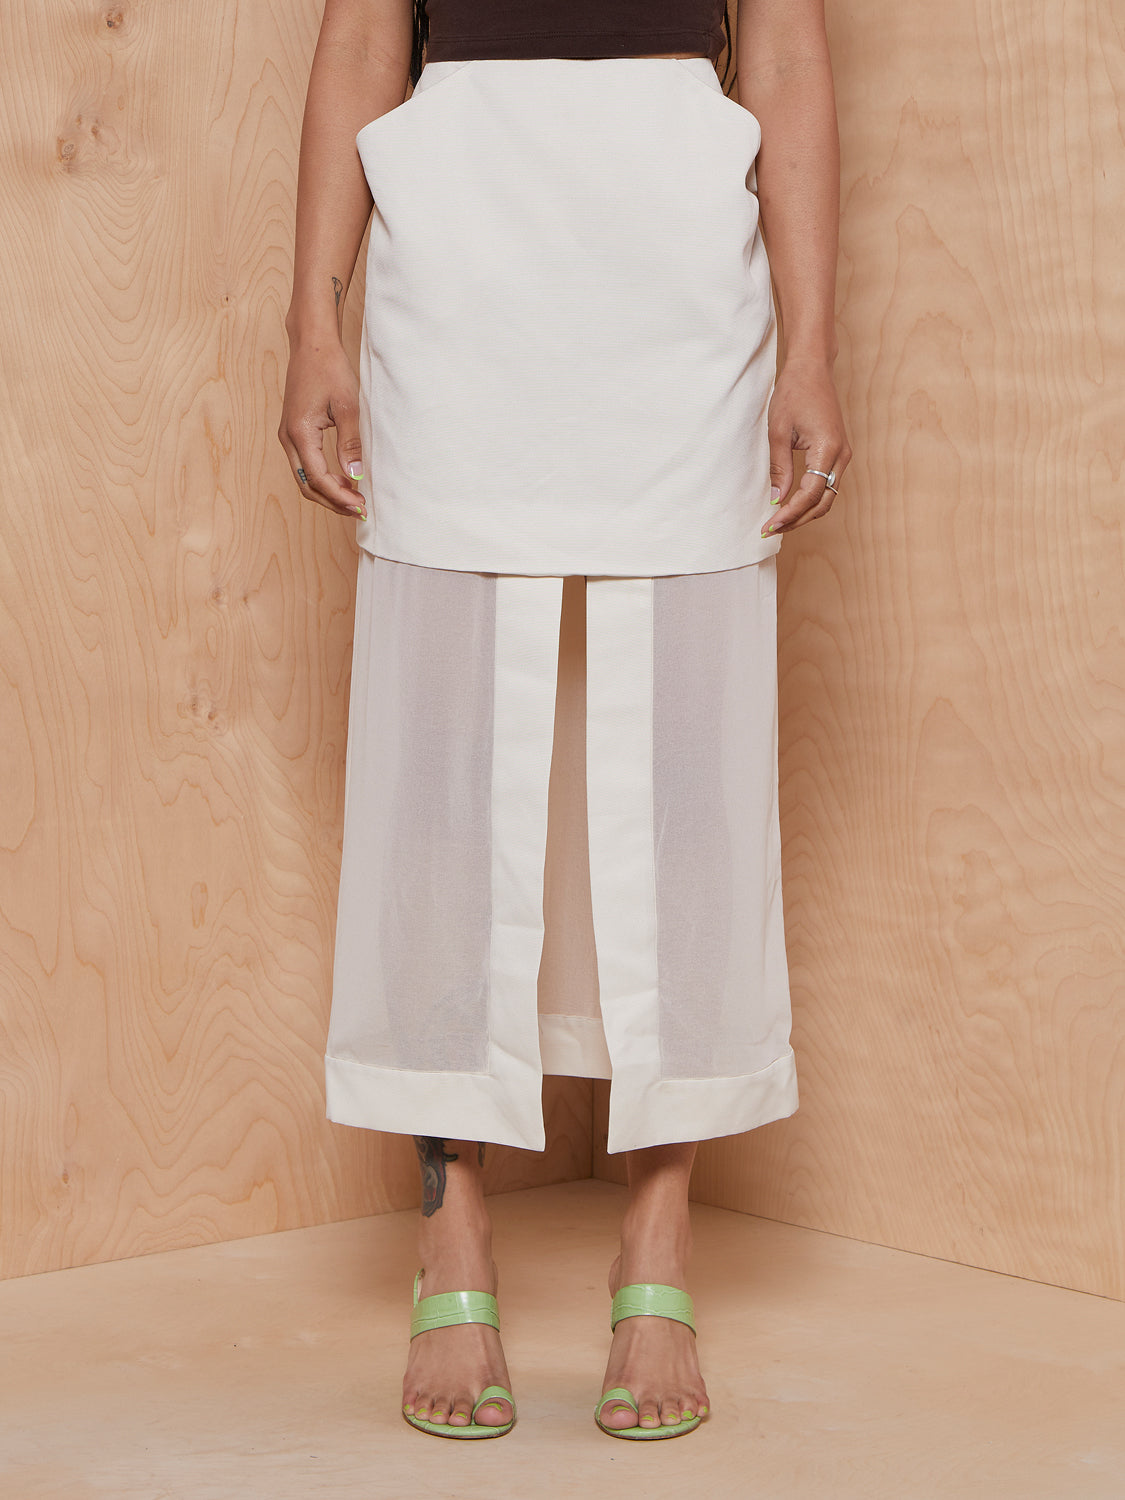 CMEO/Collective Beige Skirt